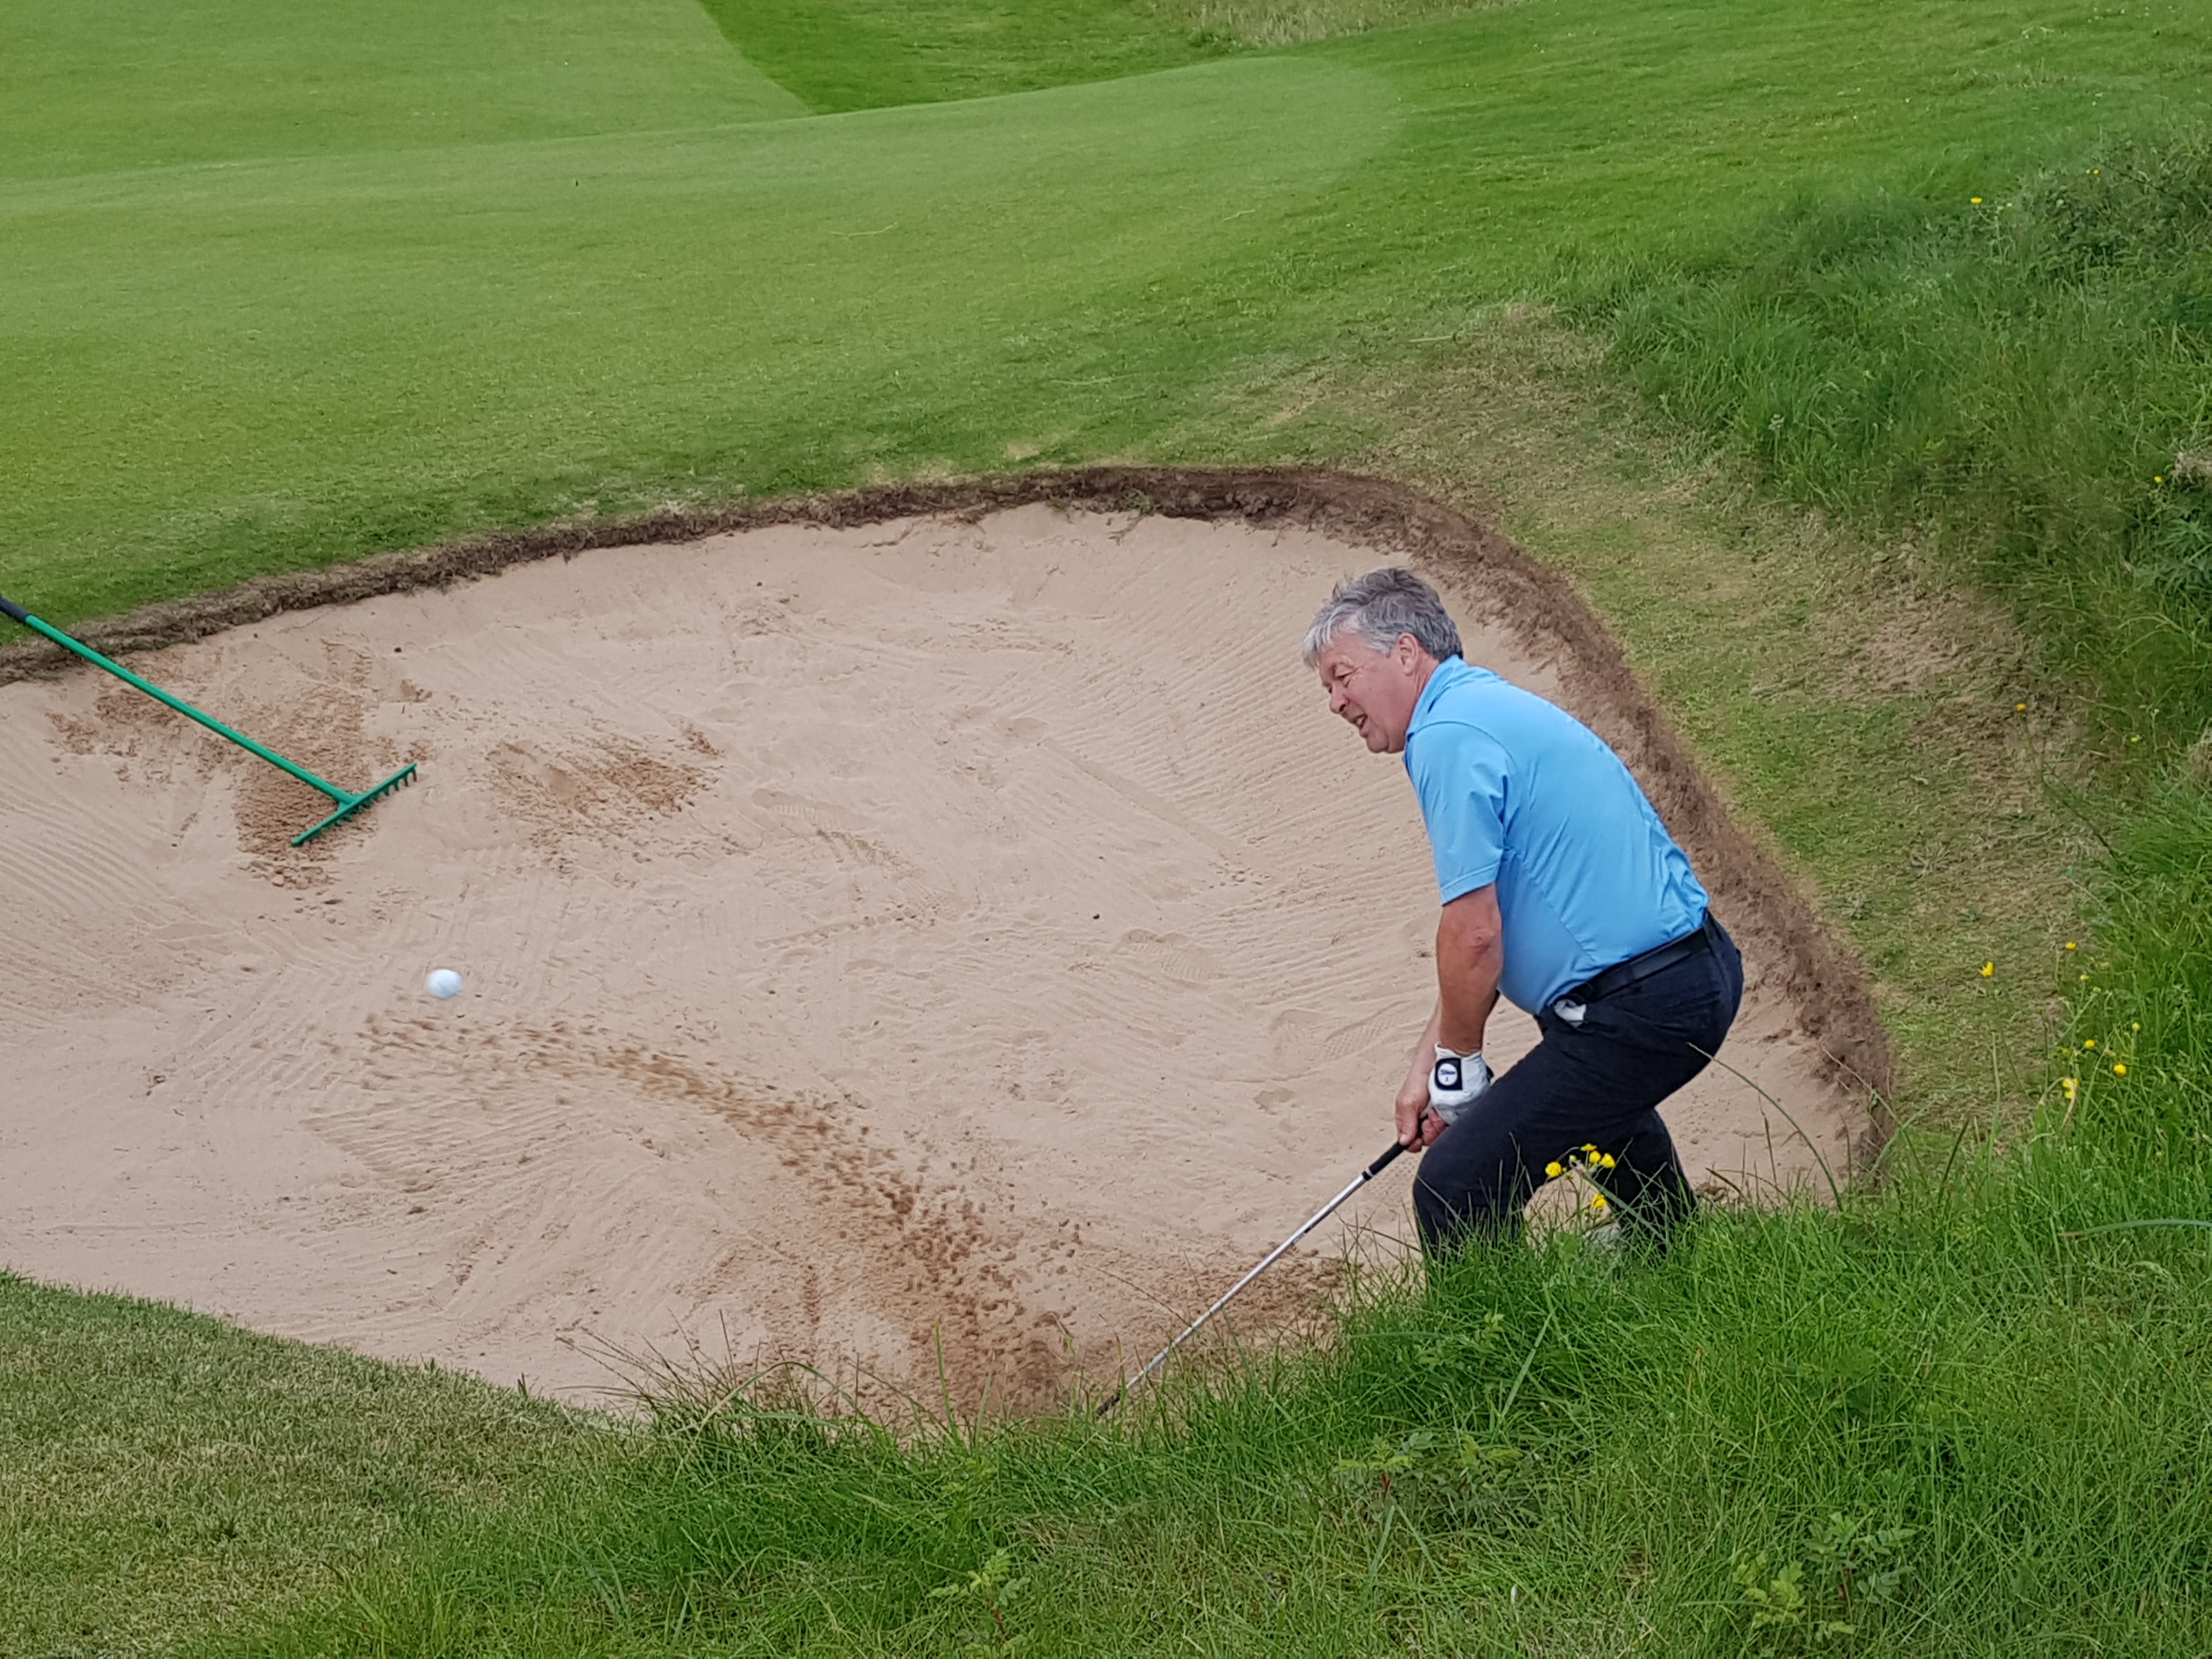 Alistair Tait gets out of a bunker at 11 on route to a great birdie.